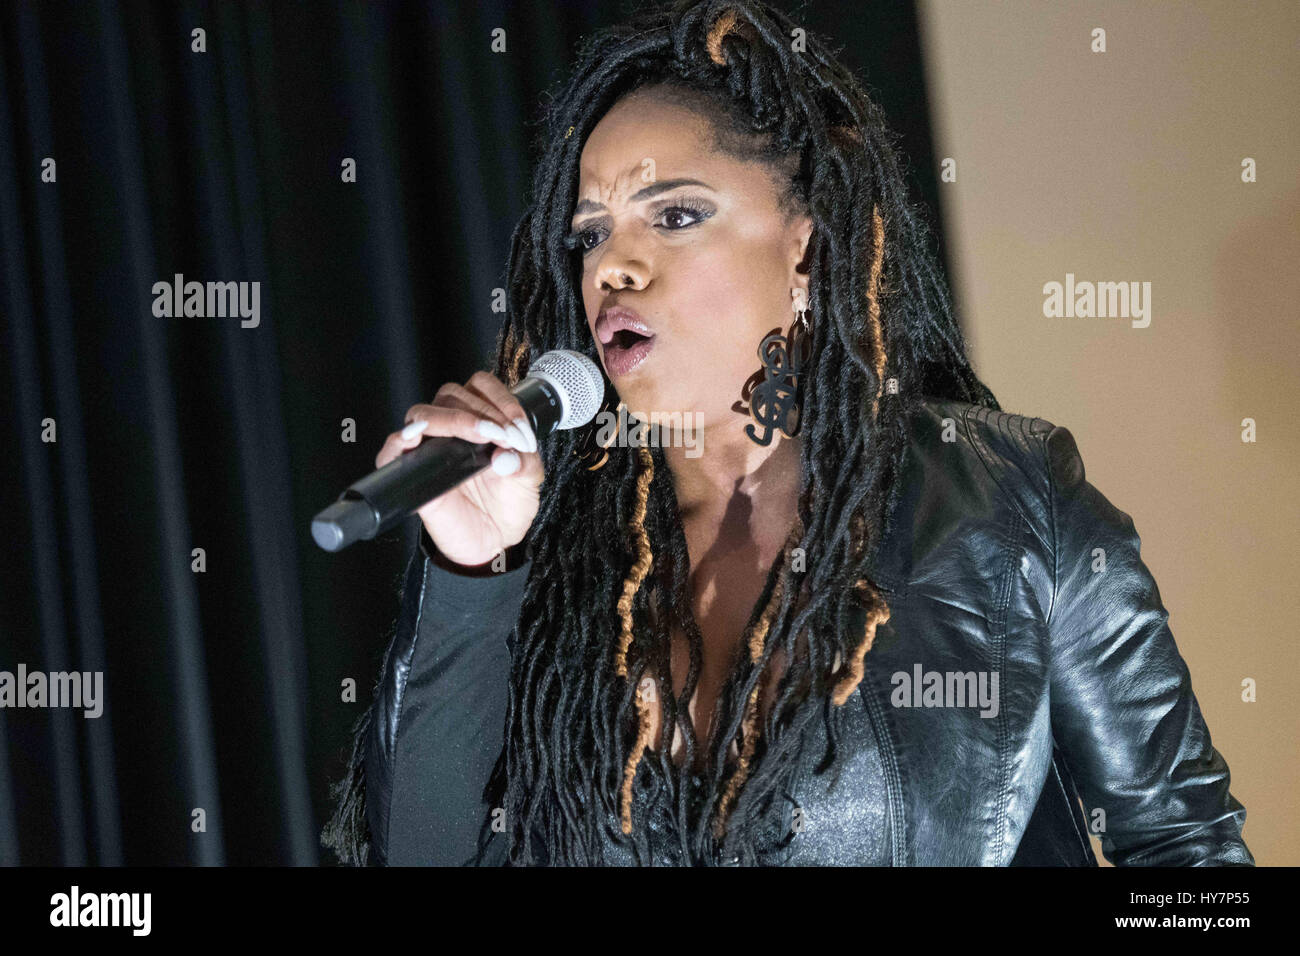 Philadelphia, Pennsylvania, USA. 1st Apr, 2017. R&B singer LEELA JAMES, performs at the WDAS Women of Excellence Award Luncheon held at the Sheraton Hotel in Philadelphia Pa It's theÂ 3rd Annual WDAS Women of Excellence Luncheon presentedÂ by Gwynedd Mercy University. Credit: Ricky Fitchett/ZUMA Wire/Alamy Live News Stock Photo